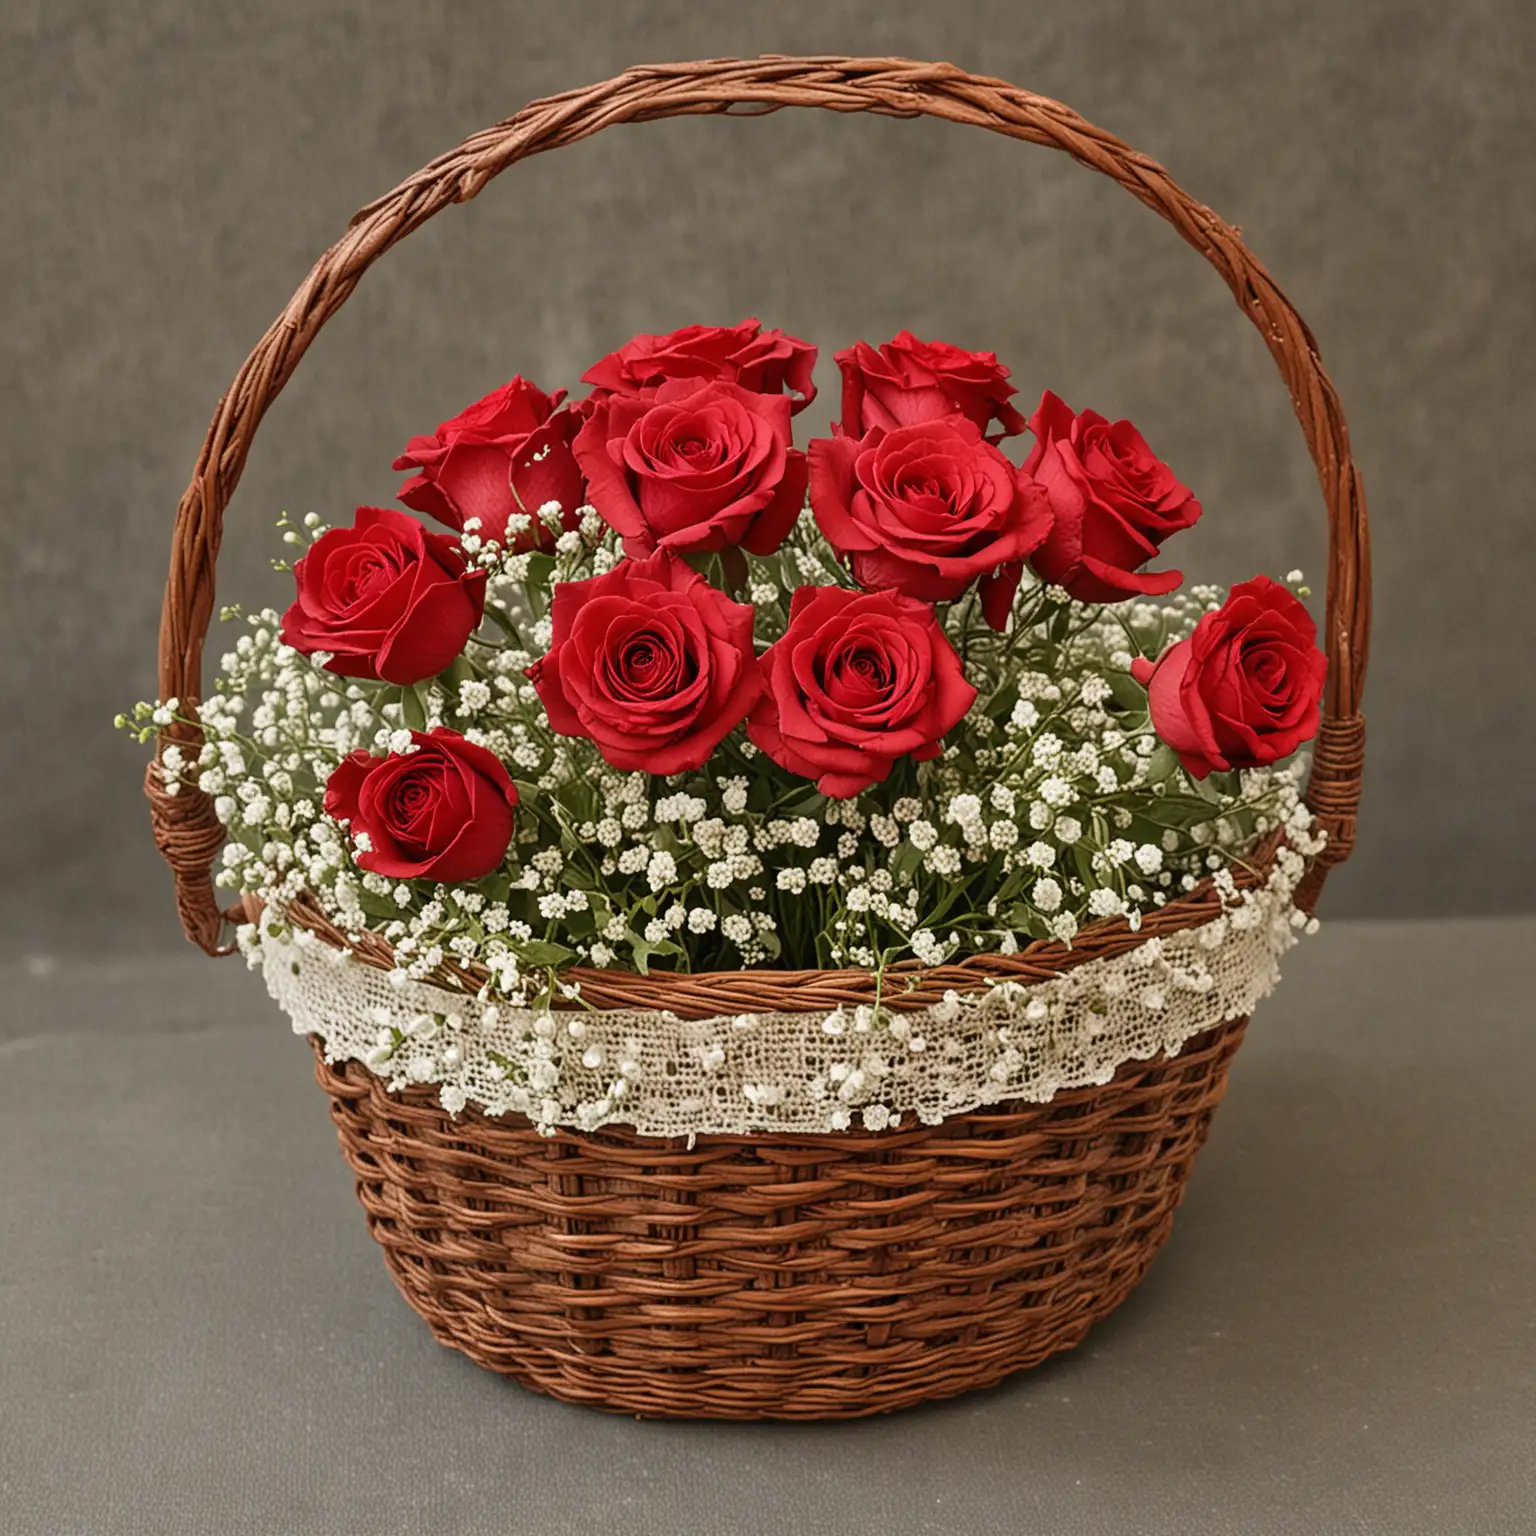 a very small worn and rustic handwoven basket filled with several red roses and baby's breath; keep the basket small enough that only 5 red roses will fit in it